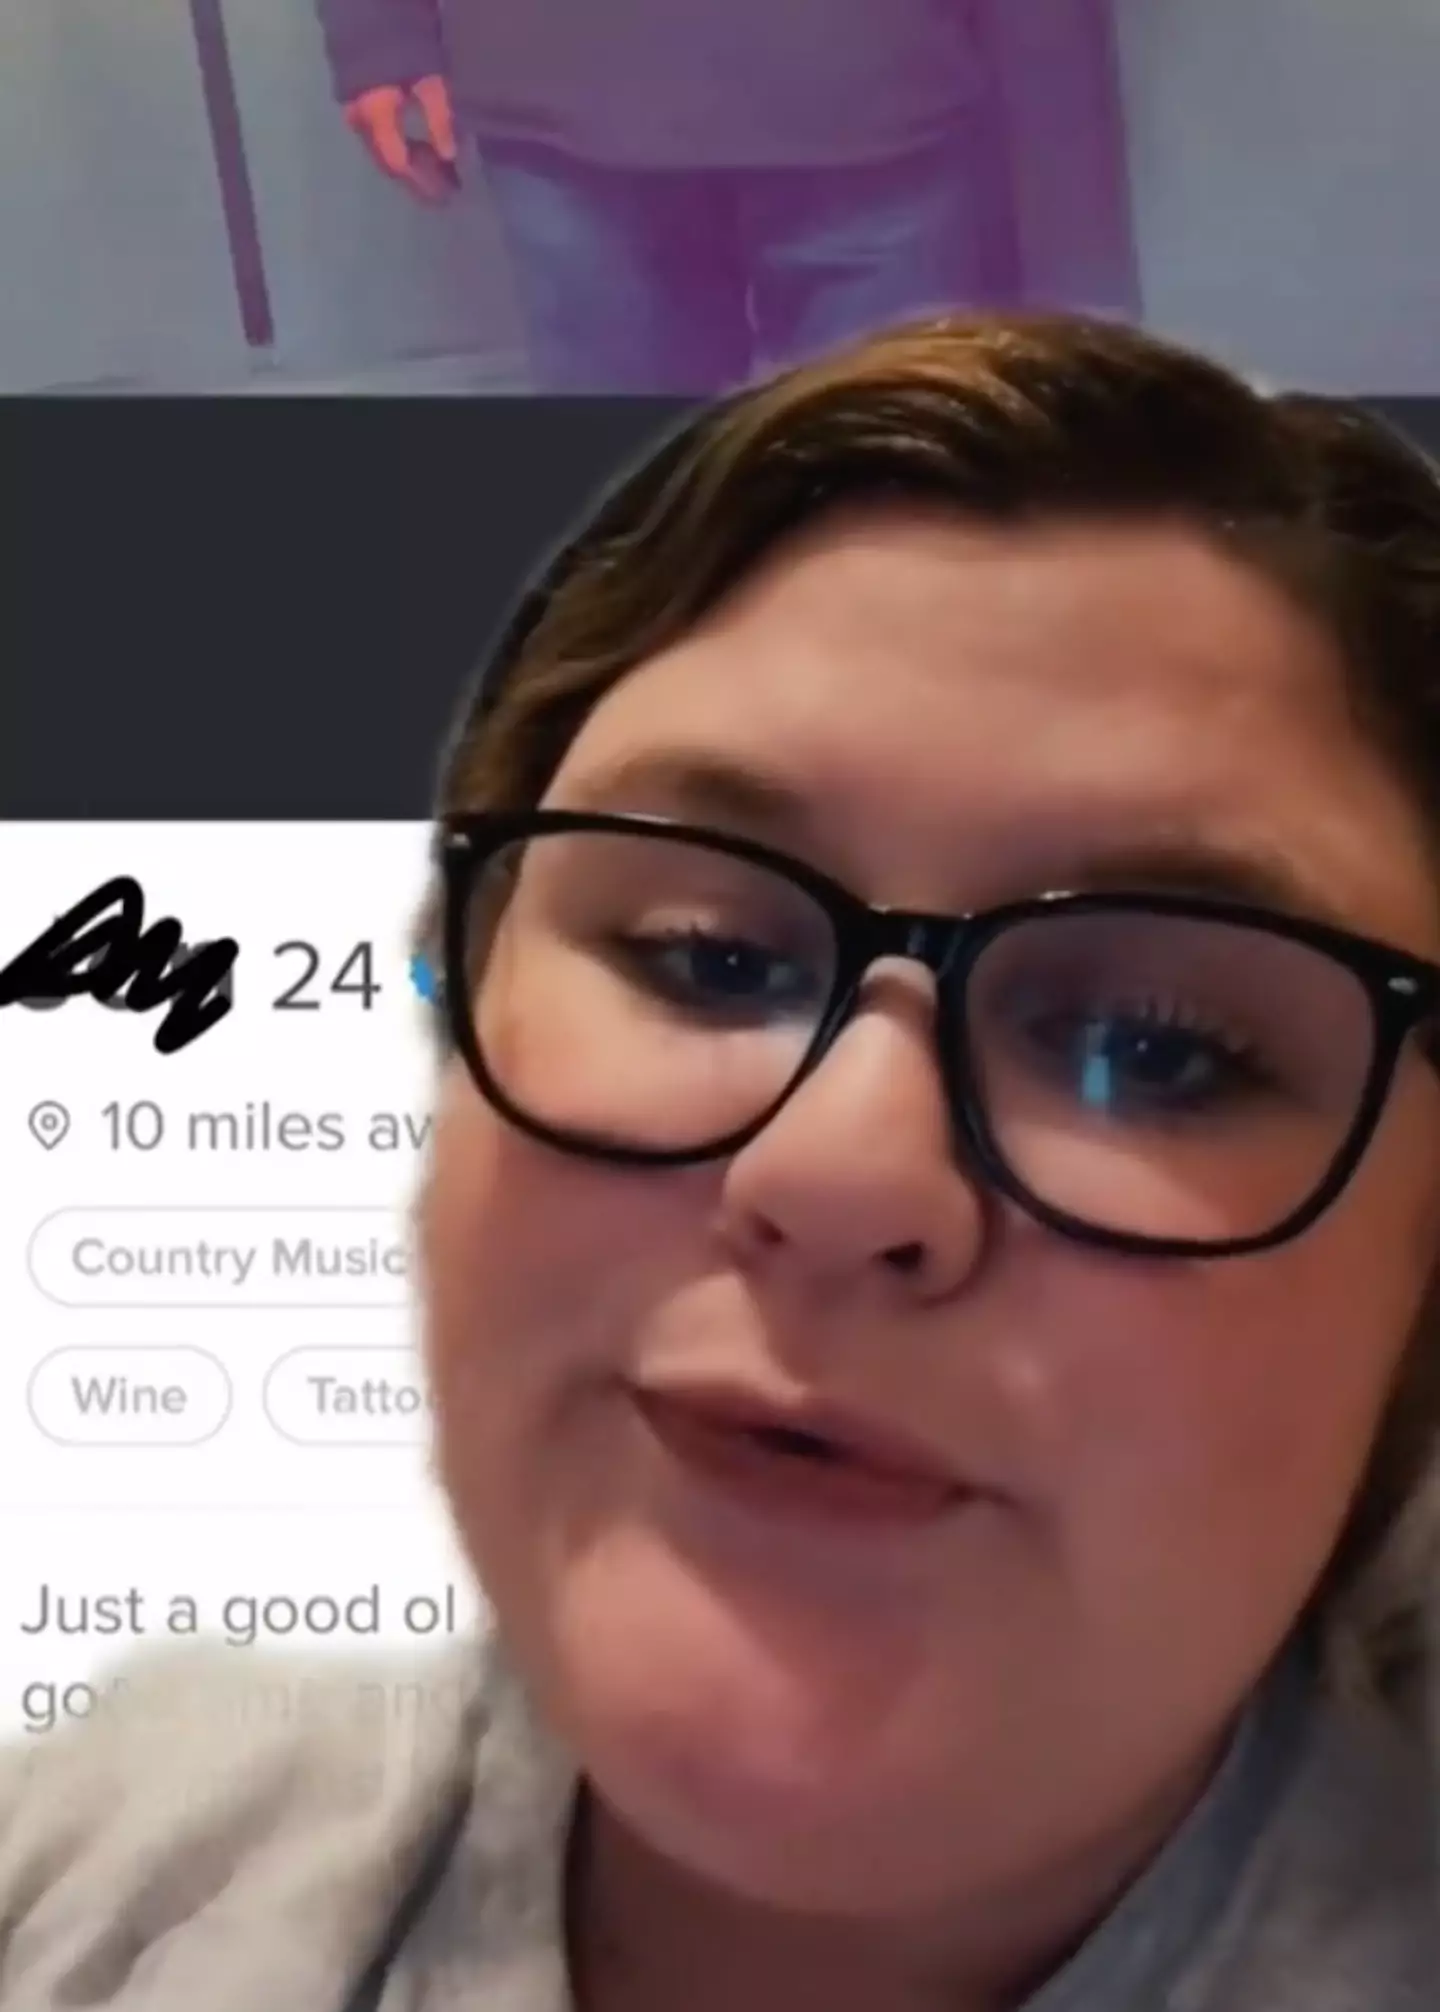 The woman shared her story on TikTok (